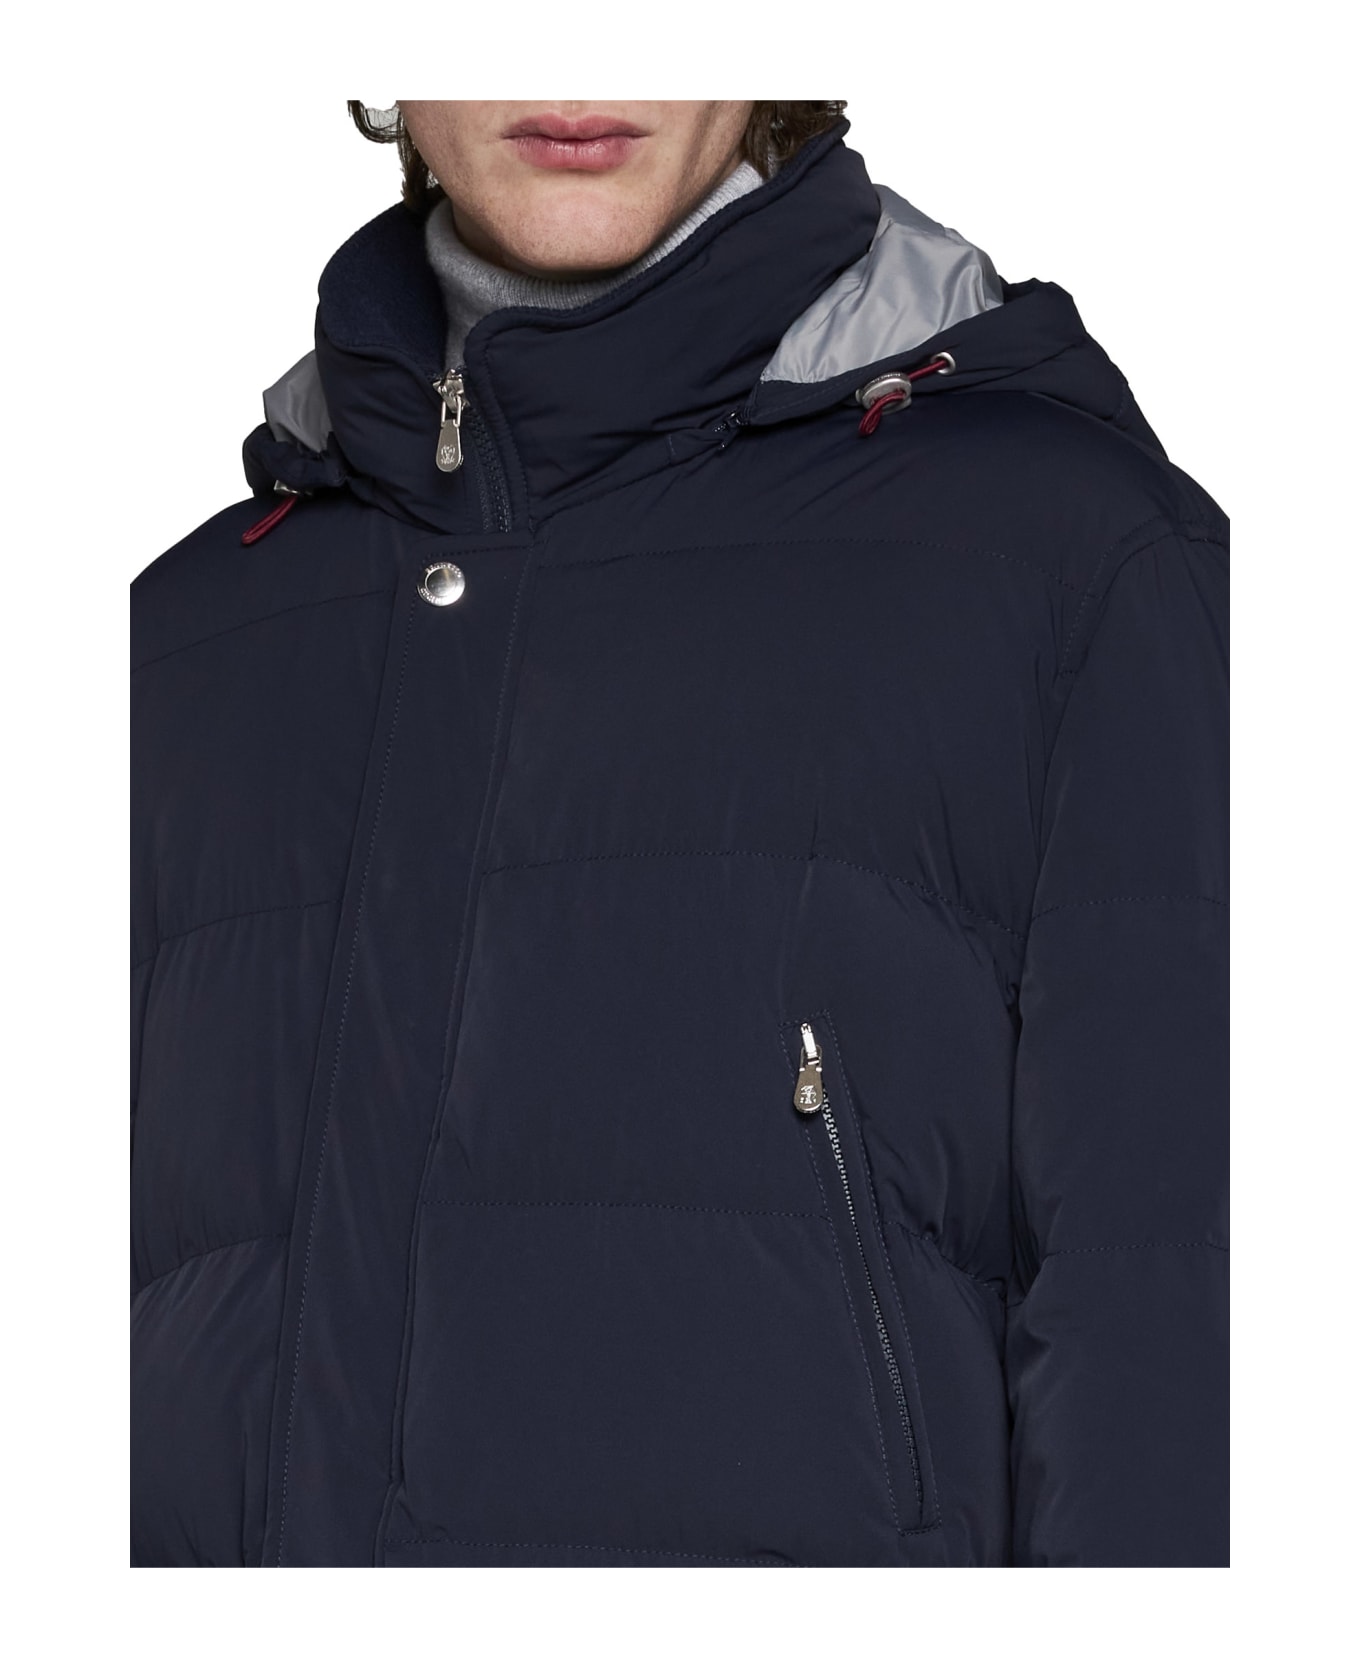 Brunello Cucinelli Quilted Nylon Down Jacket With Detachable Hood - Navy ダウンジャケット